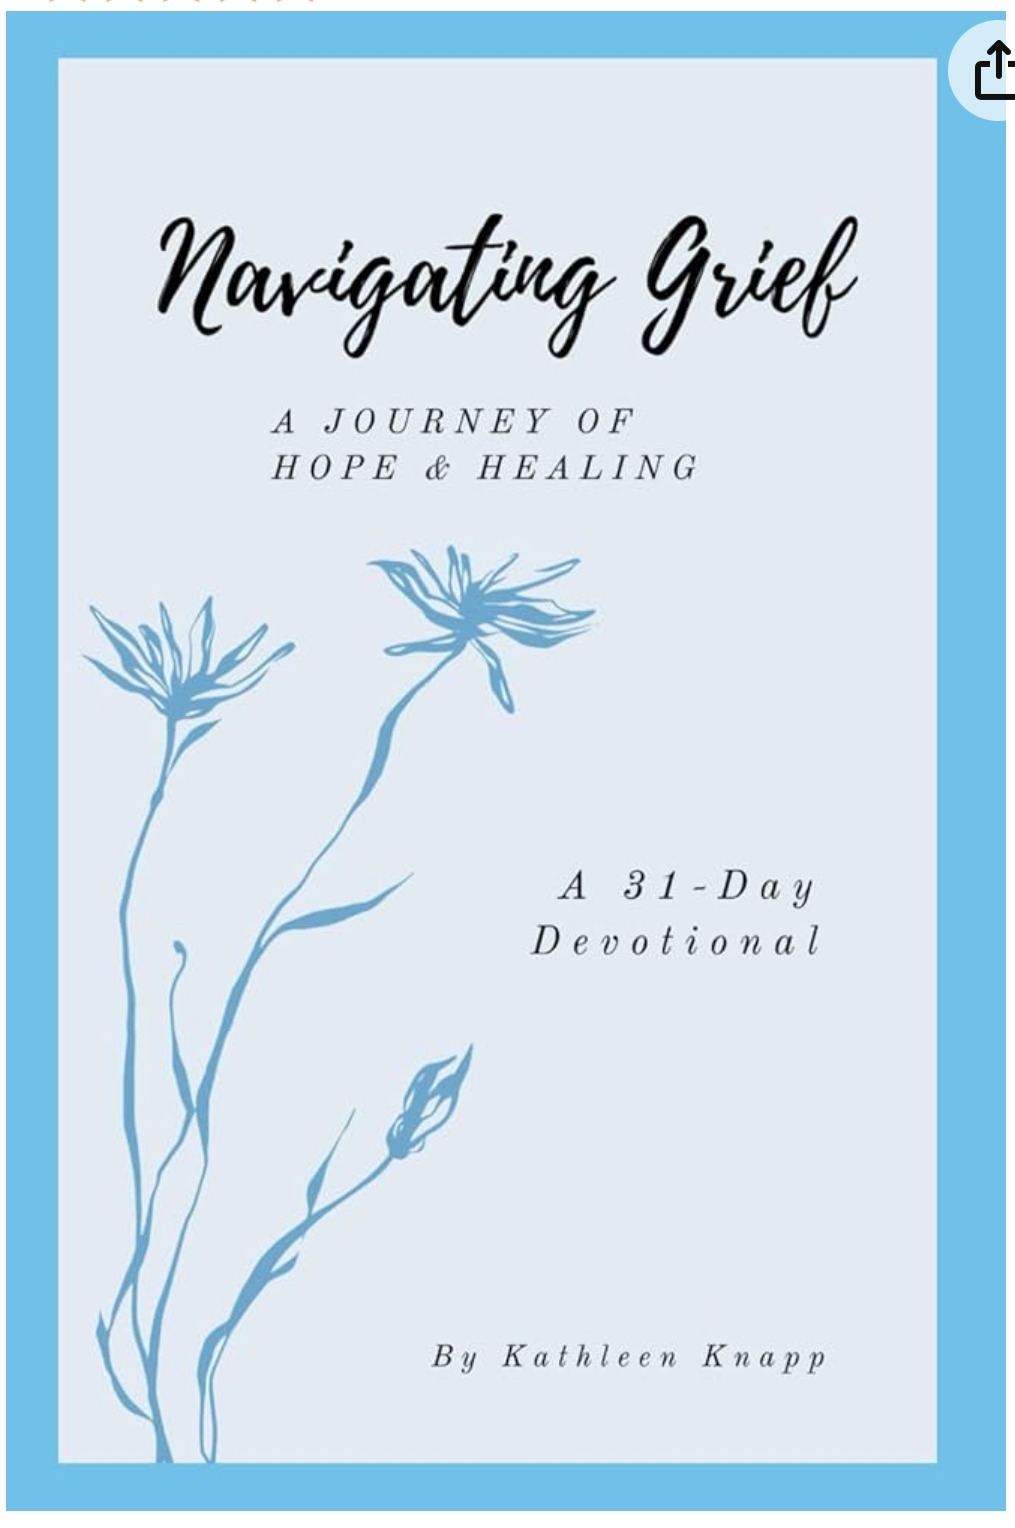 New Book! "Navigating Grief - A Journey of Hope & Healing" A 31-Day Devotional & Companion Journal (Amazon)